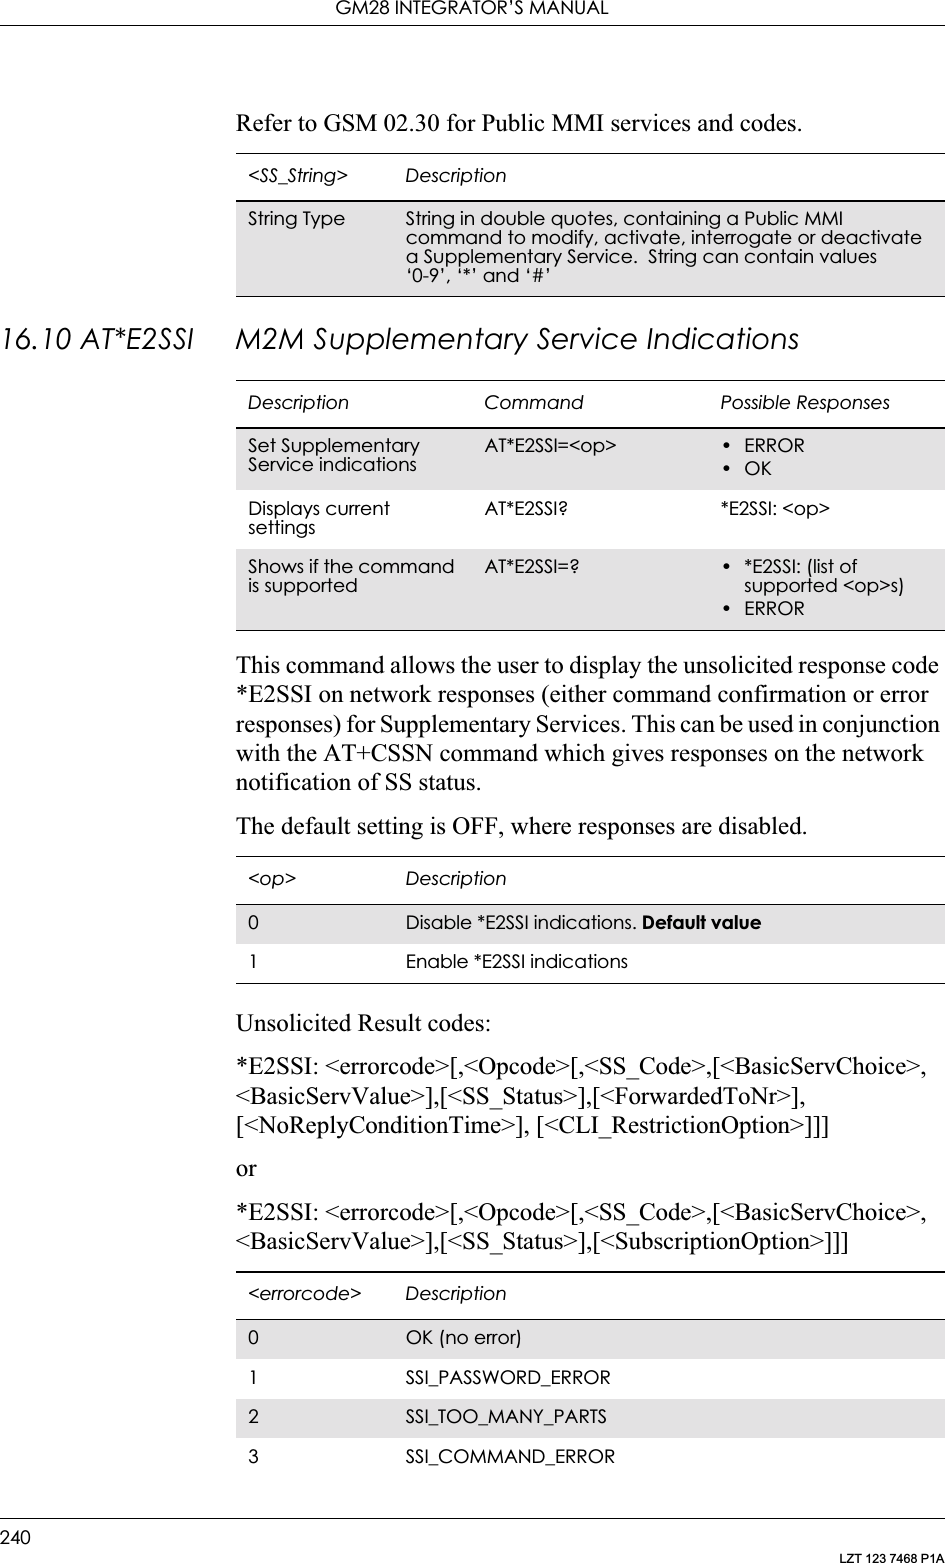 GM28 INTEGRATOR’S MANUAL240LZT 123 7468 P1ARefer to GSM 02.30 for Public MMI services and codes.16.10 AT*E2SSI M2M Supplementary Service IndicationsThis command allows the user to display the unsolicited response code *E2SSI on network responses (either command confirmation or error responses) for Supplementary Services. This can be used in conjunction with the AT+CSSN command which gives responses on the network notification of SS status.The default setting is OFF, where responses are disabled.Unsolicited Result codes:*E2SSI: &lt;errorcode&gt;[,&lt;Opcode&gt;[,&lt;SS_Code&gt;,[&lt;BasicServChoice&gt;, &lt;BasicServValue&gt;],[&lt;SS_Status&gt;],[&lt;ForwardedToNr&gt;], [&lt;NoReplyConditionTime&gt;], [&lt;CLI_RestrictionOption&gt;]]]or*E2SSI: &lt;errorcode&gt;[,&lt;Opcode&gt;[,&lt;SS_Code&gt;,[&lt;BasicServChoice&gt;, &lt;BasicServValue&gt;],[&lt;SS_Status&gt;],[&lt;SubscriptionOption&gt;]]]&lt;SS_String&gt; DescriptionString Type String in double quotes, containing a Public MMI command to modify, activate, interrogate or deactivate a Supplementary Service.  String can contain values‘0-9’, ‘*’ and ‘#’Description Command Possible ResponsesSet Supplementary Service indicationsAT*E2SSI=&lt;op&gt; •ERROR•OKDisplays current settingsAT*E2SSI? *E2SSI: &lt;op&gt;Shows if the command is supportedAT*E2SSI=? • *E2SSI: (list of supported &lt;op&gt;s)•ERROR&lt;op&gt; Description0Disable *E2SSI indications. Default value1 Enable *E2SSI indications&lt;errorcode&gt; Description0OK (no error)1 SSI_PASSWORD_ERROR2SSI_TOO_MANY_PARTS3 SSI_COMMAND_ERROR